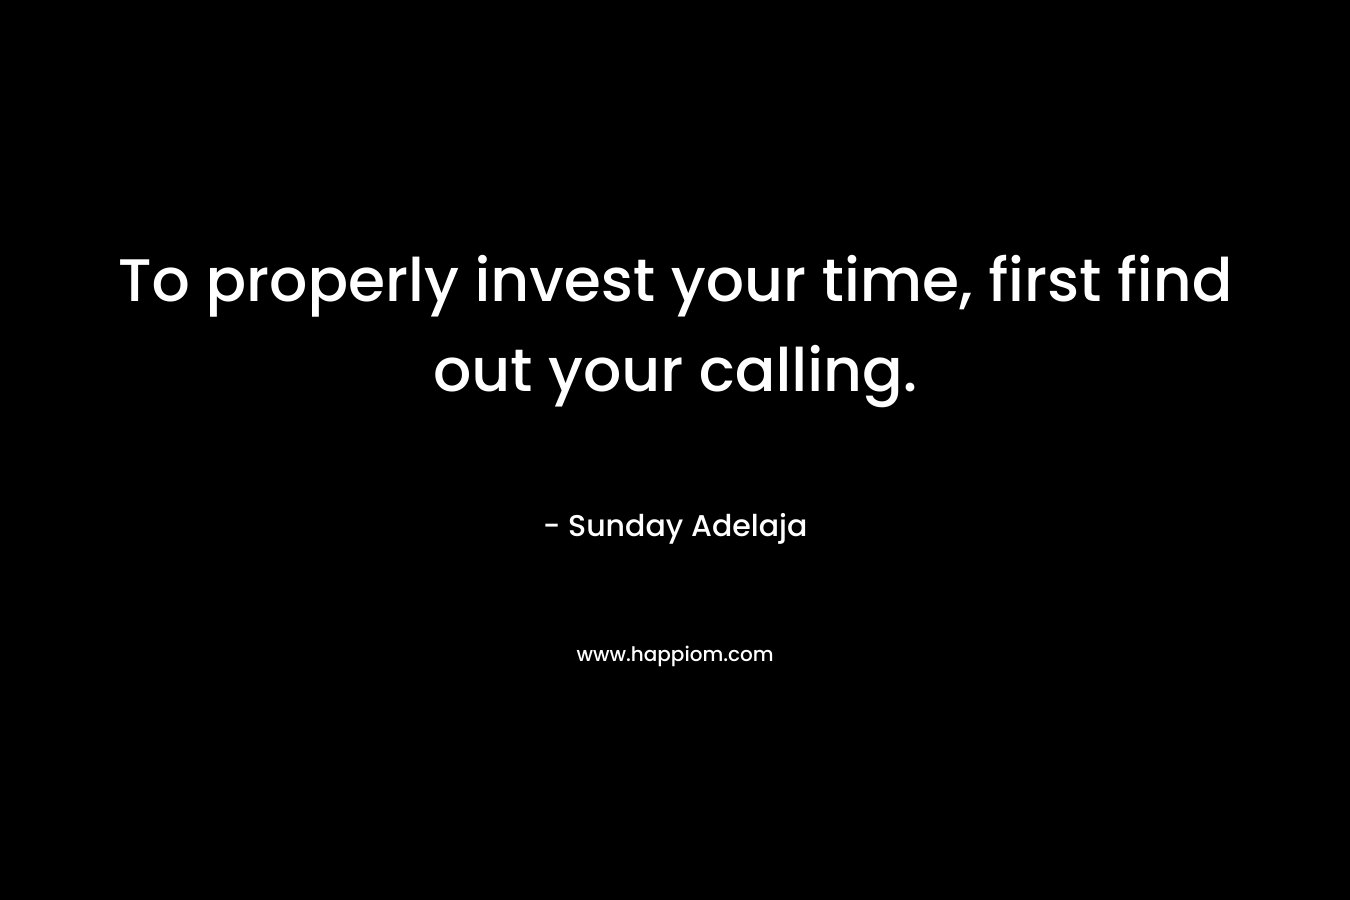 To properly invest your time, first find out your calling.